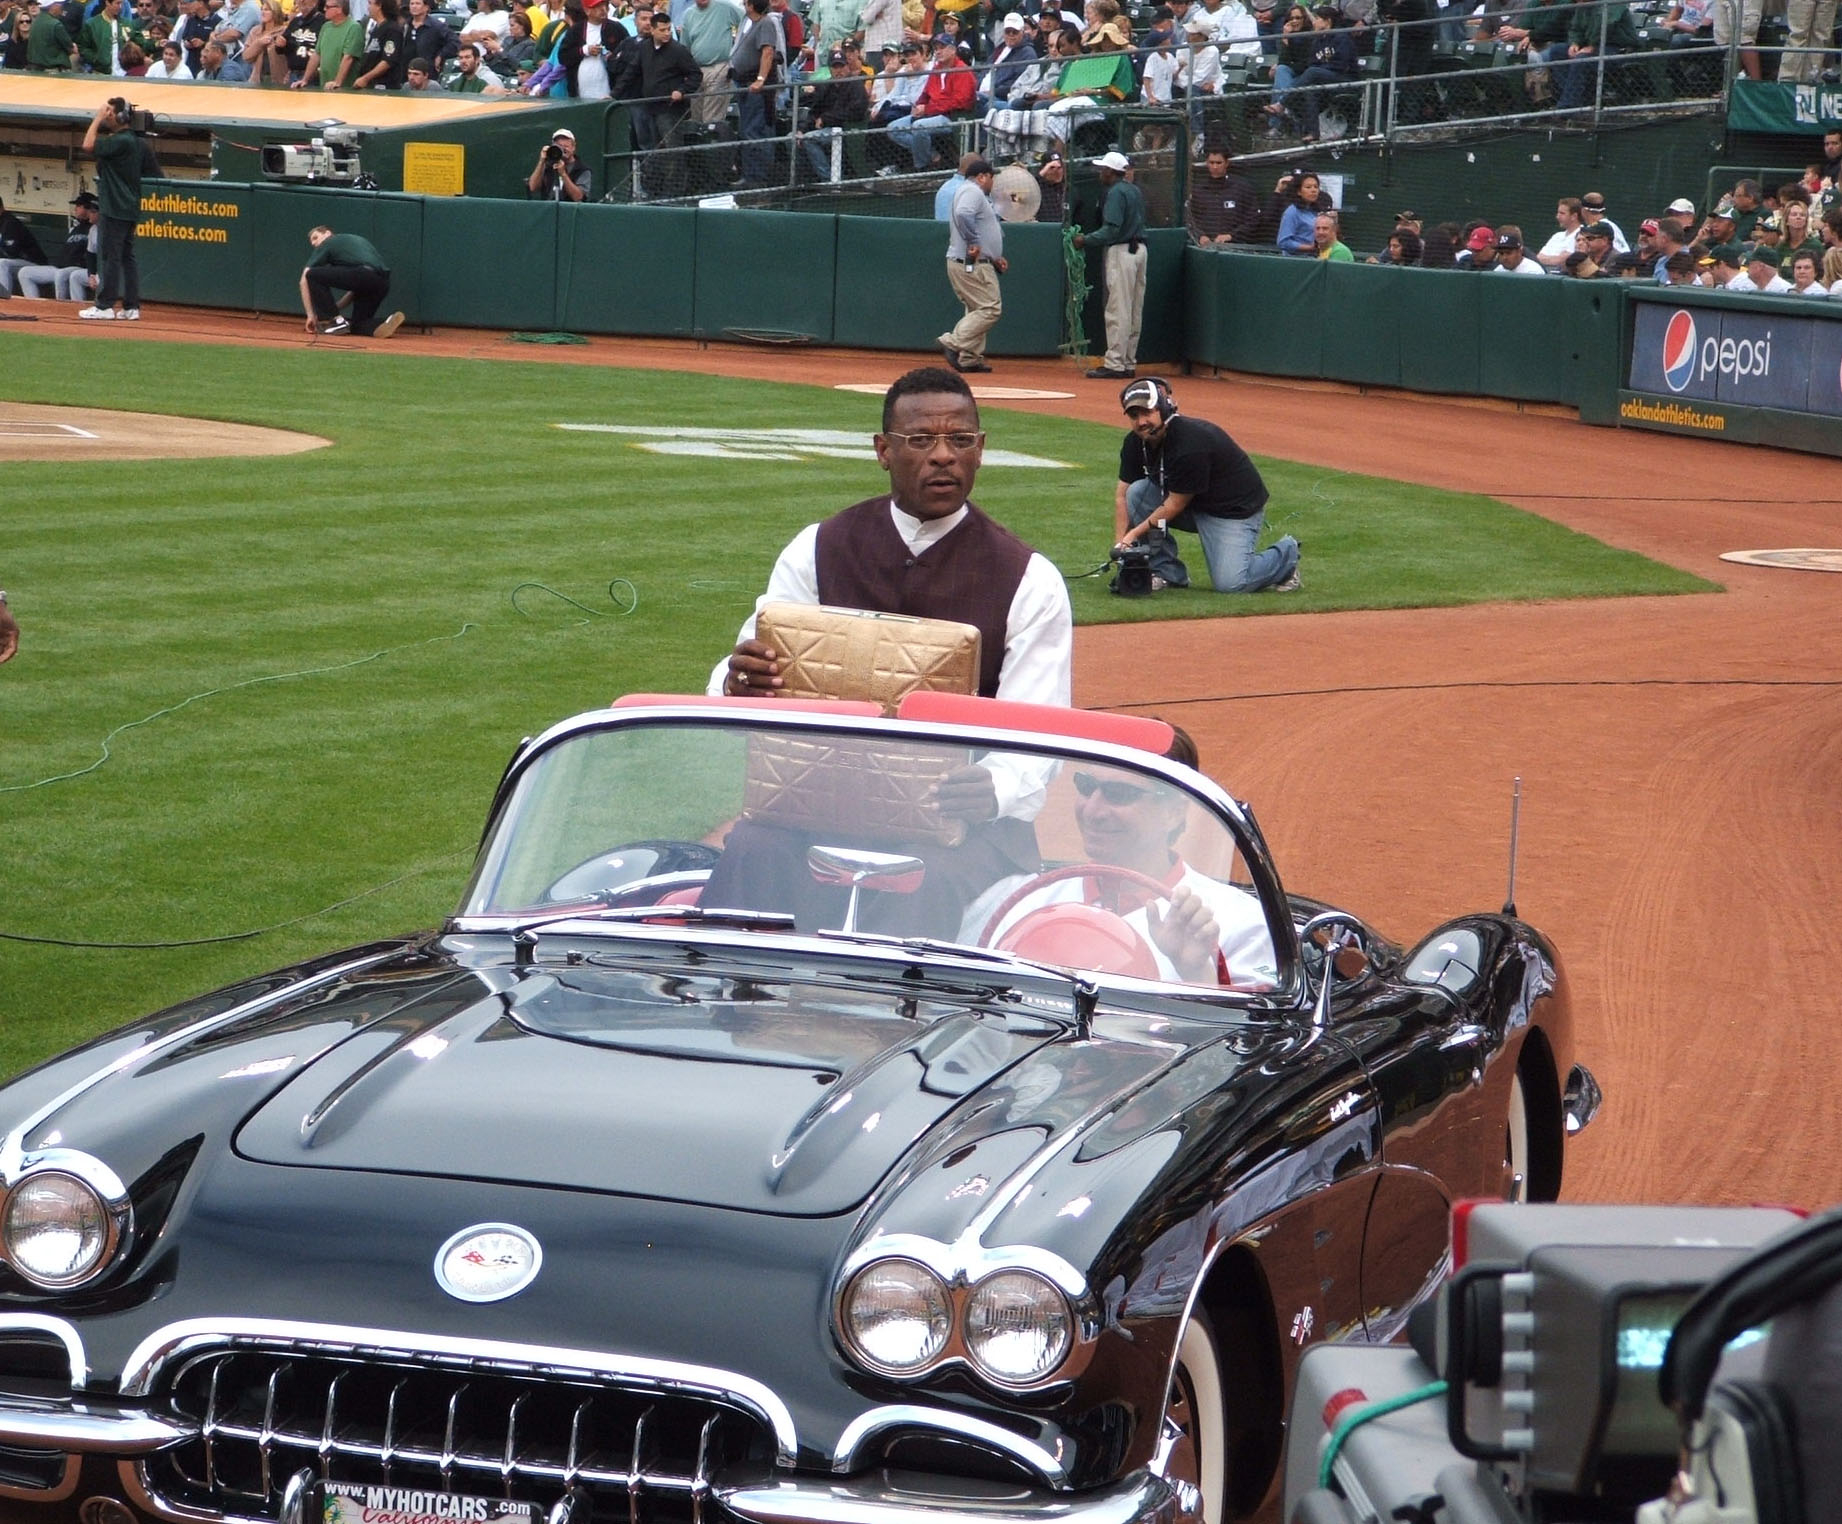 Rickey riding in car with gold base - cropped.jpg